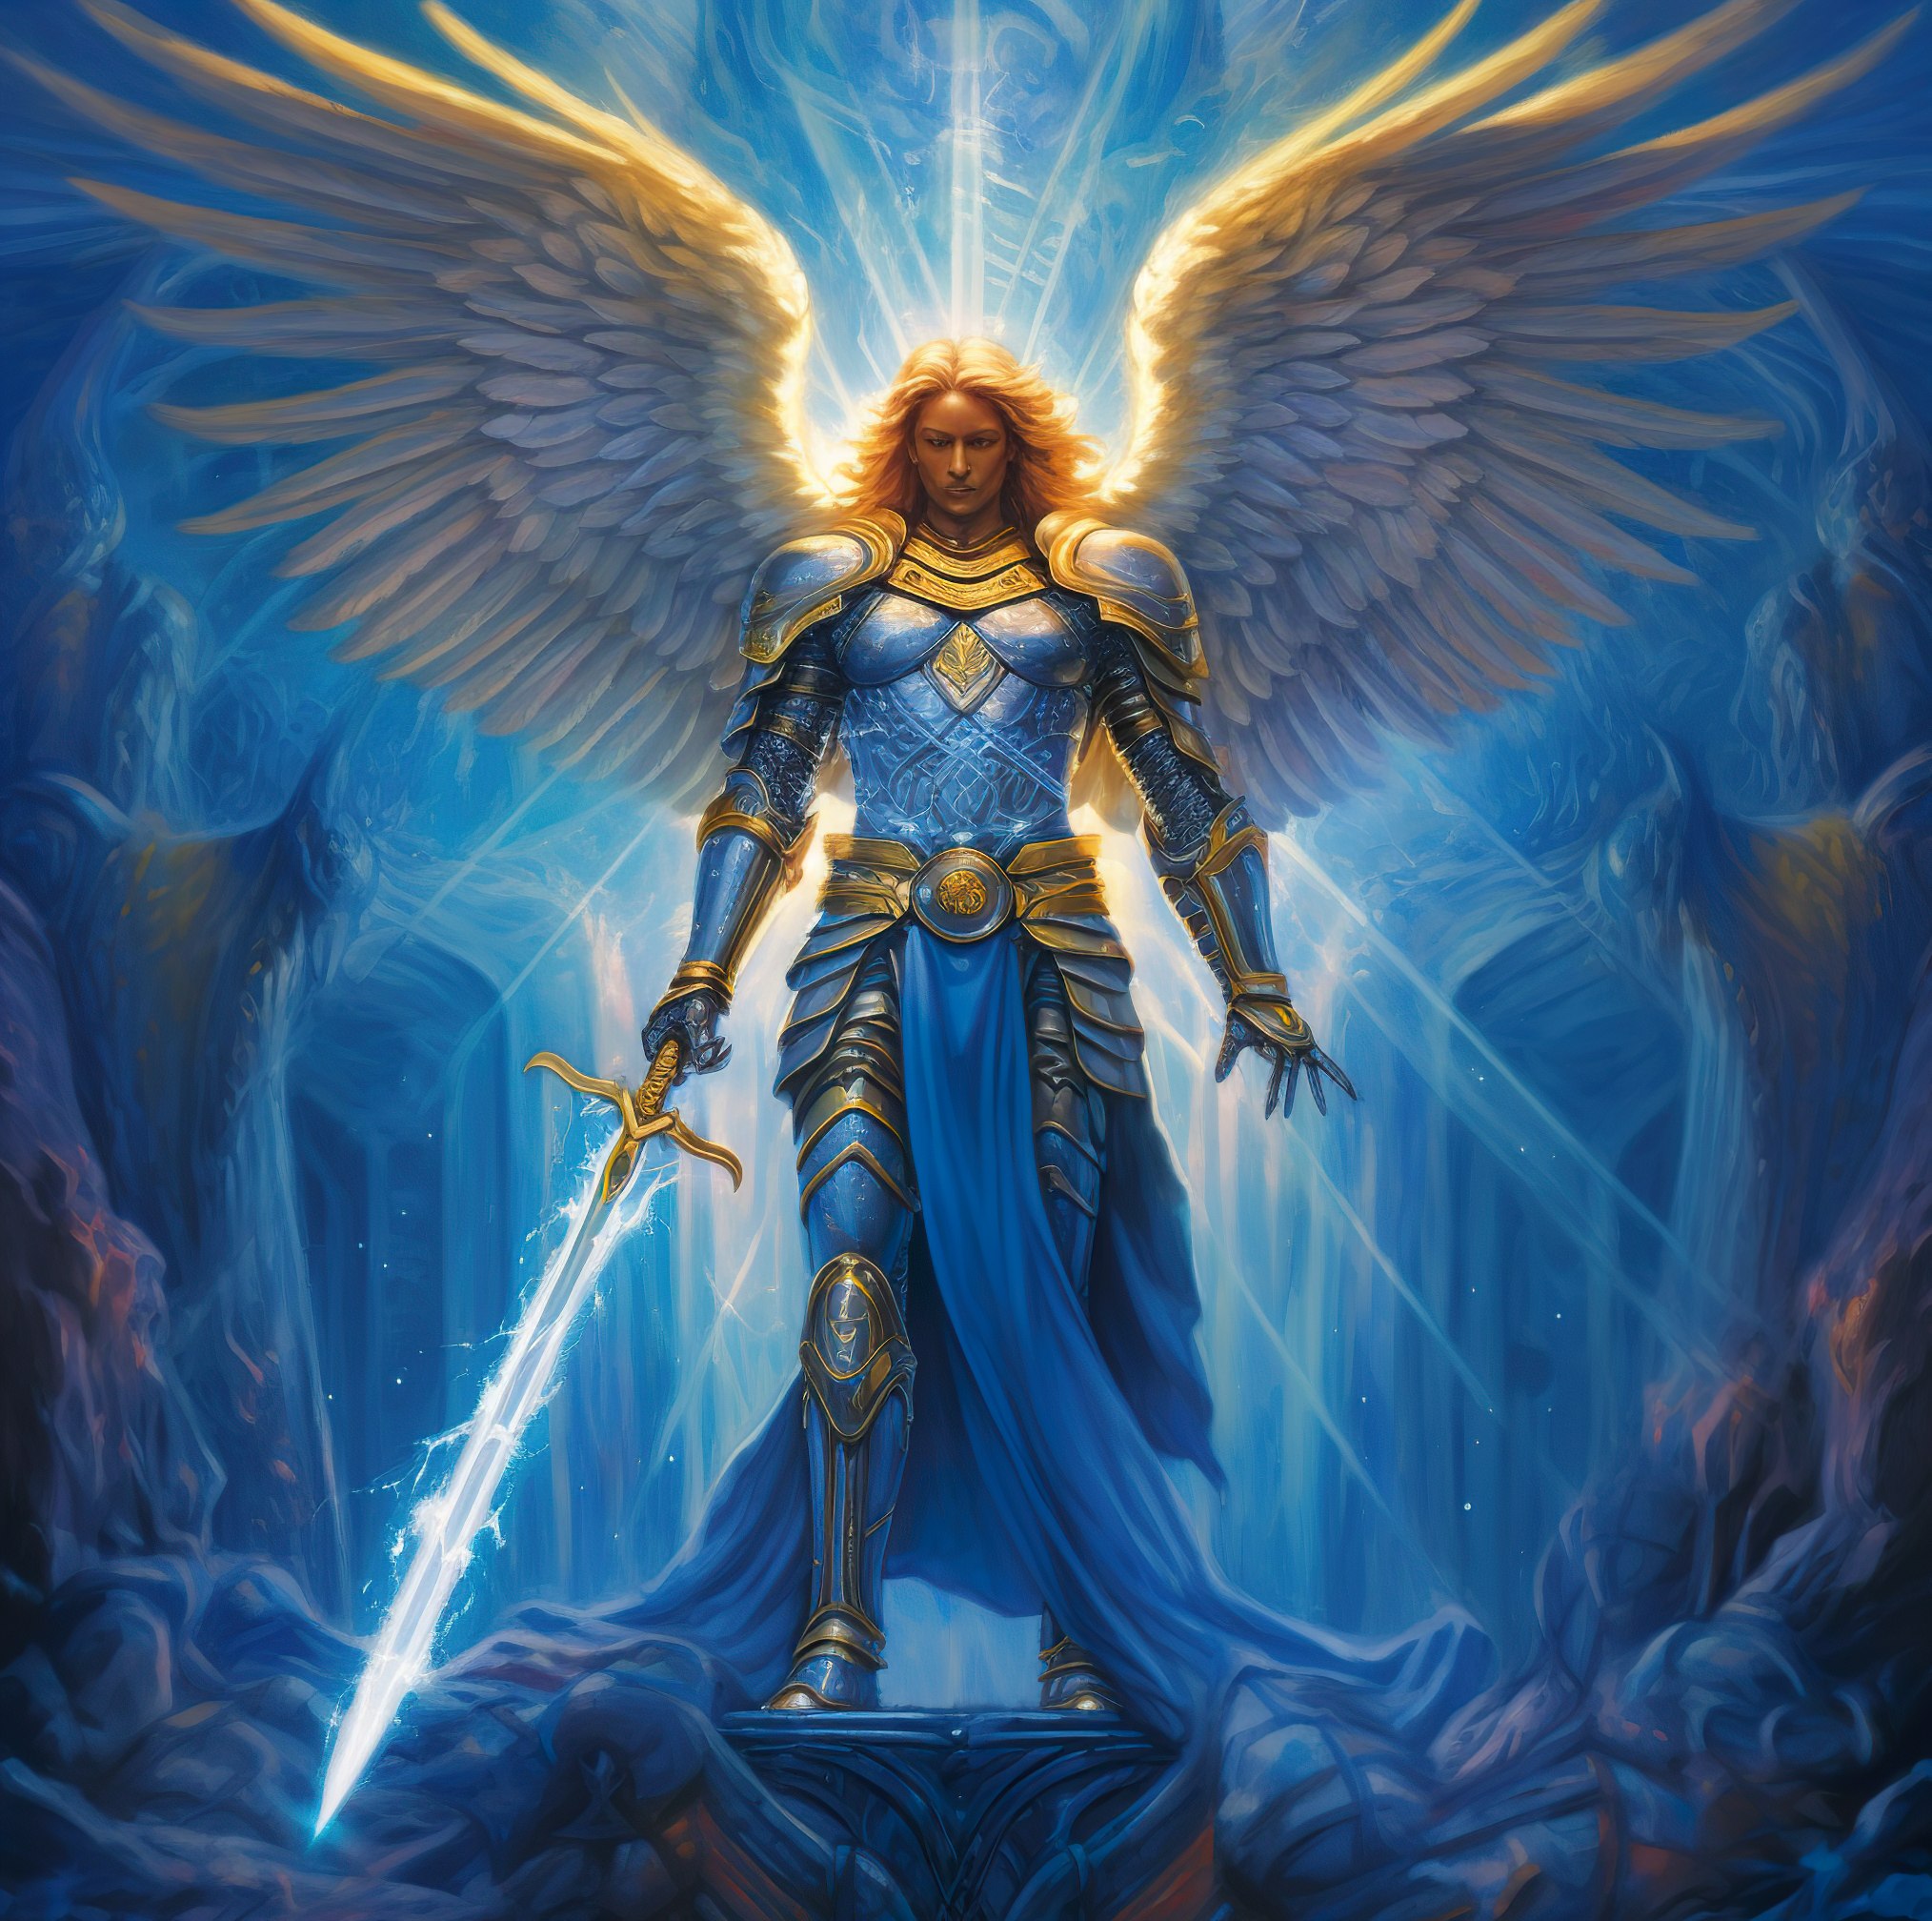 The Sword of Archangel Michael – Sever Cords & Embrace Protection